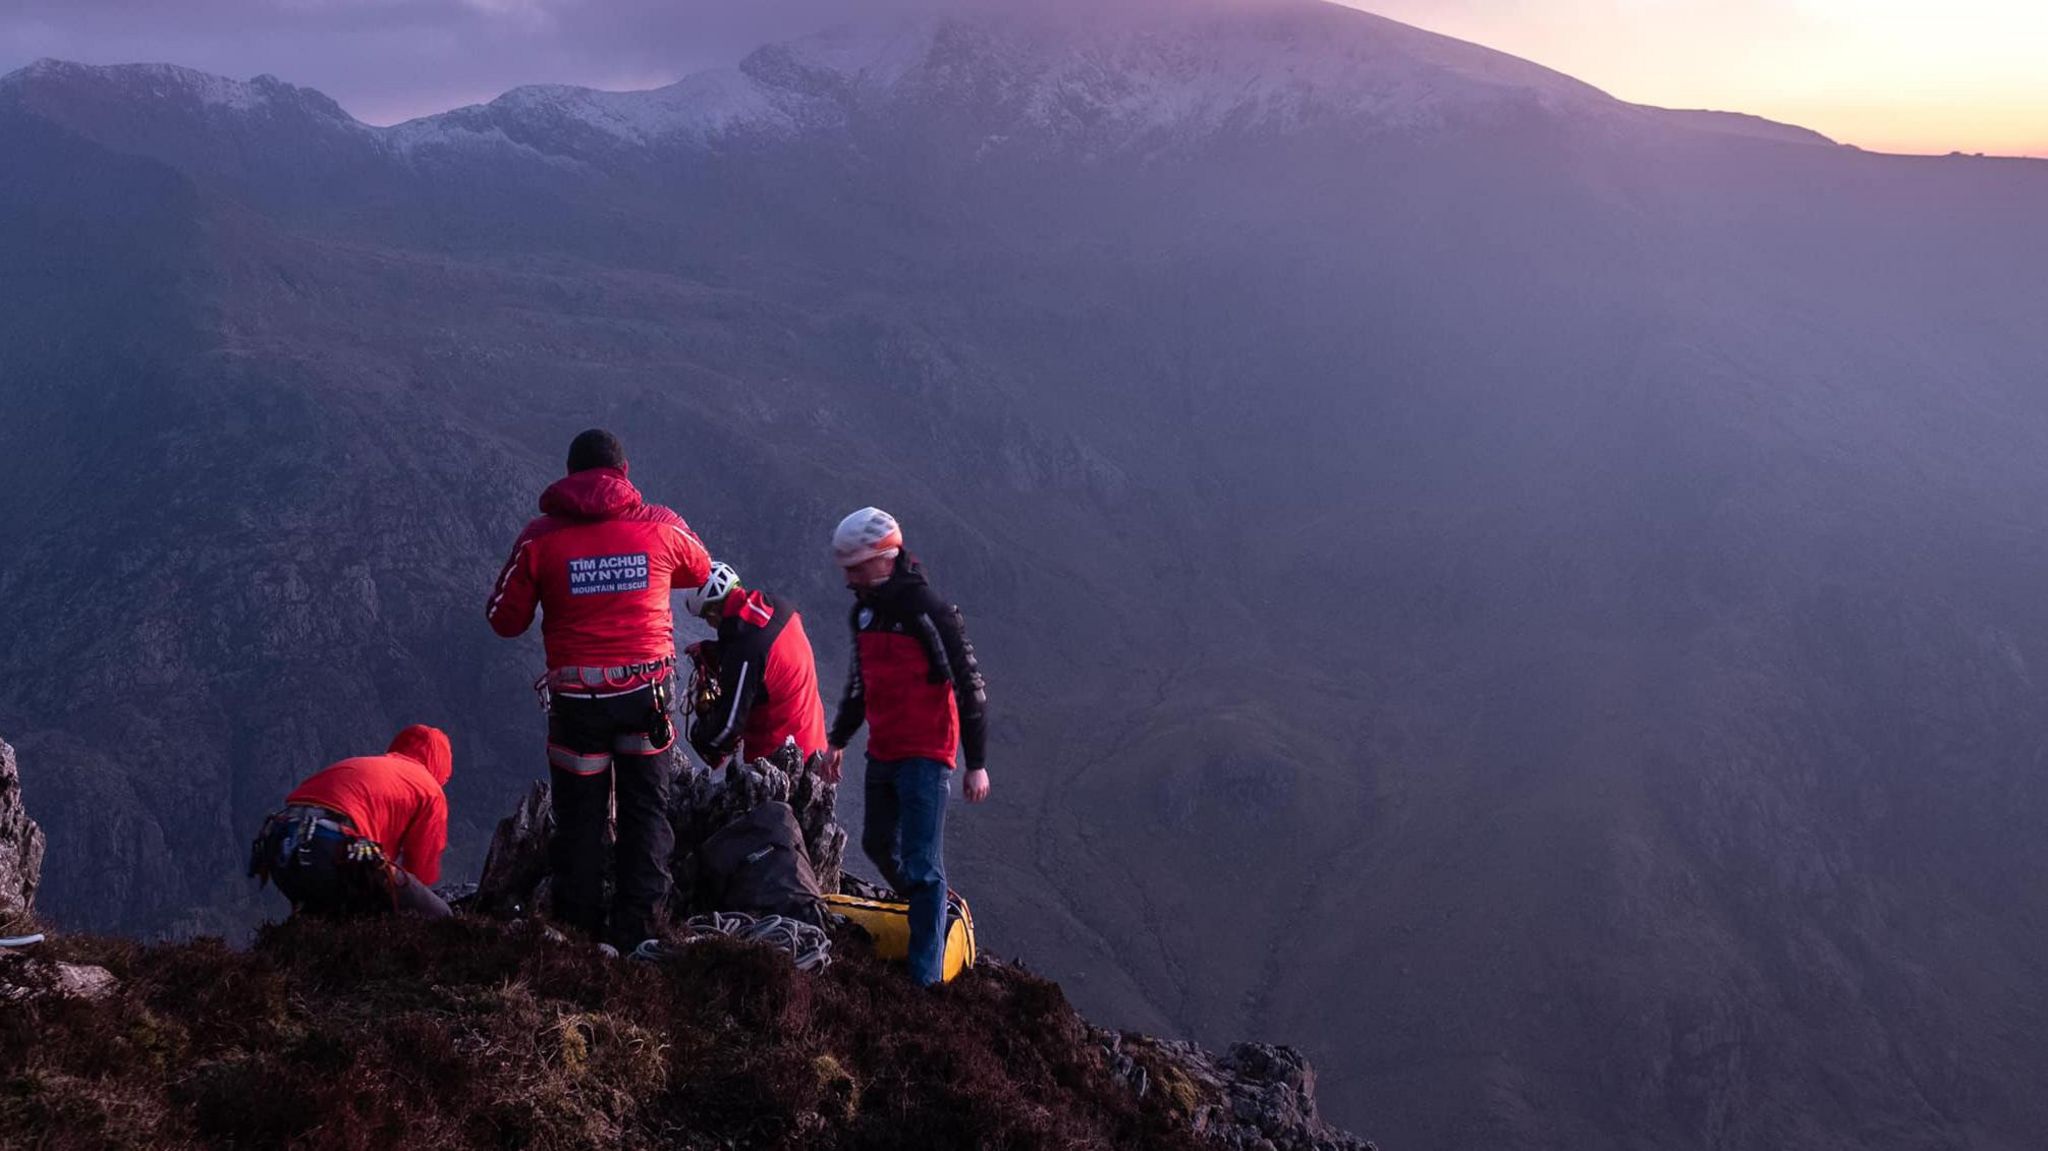 Mountain rescuers respond to a callout